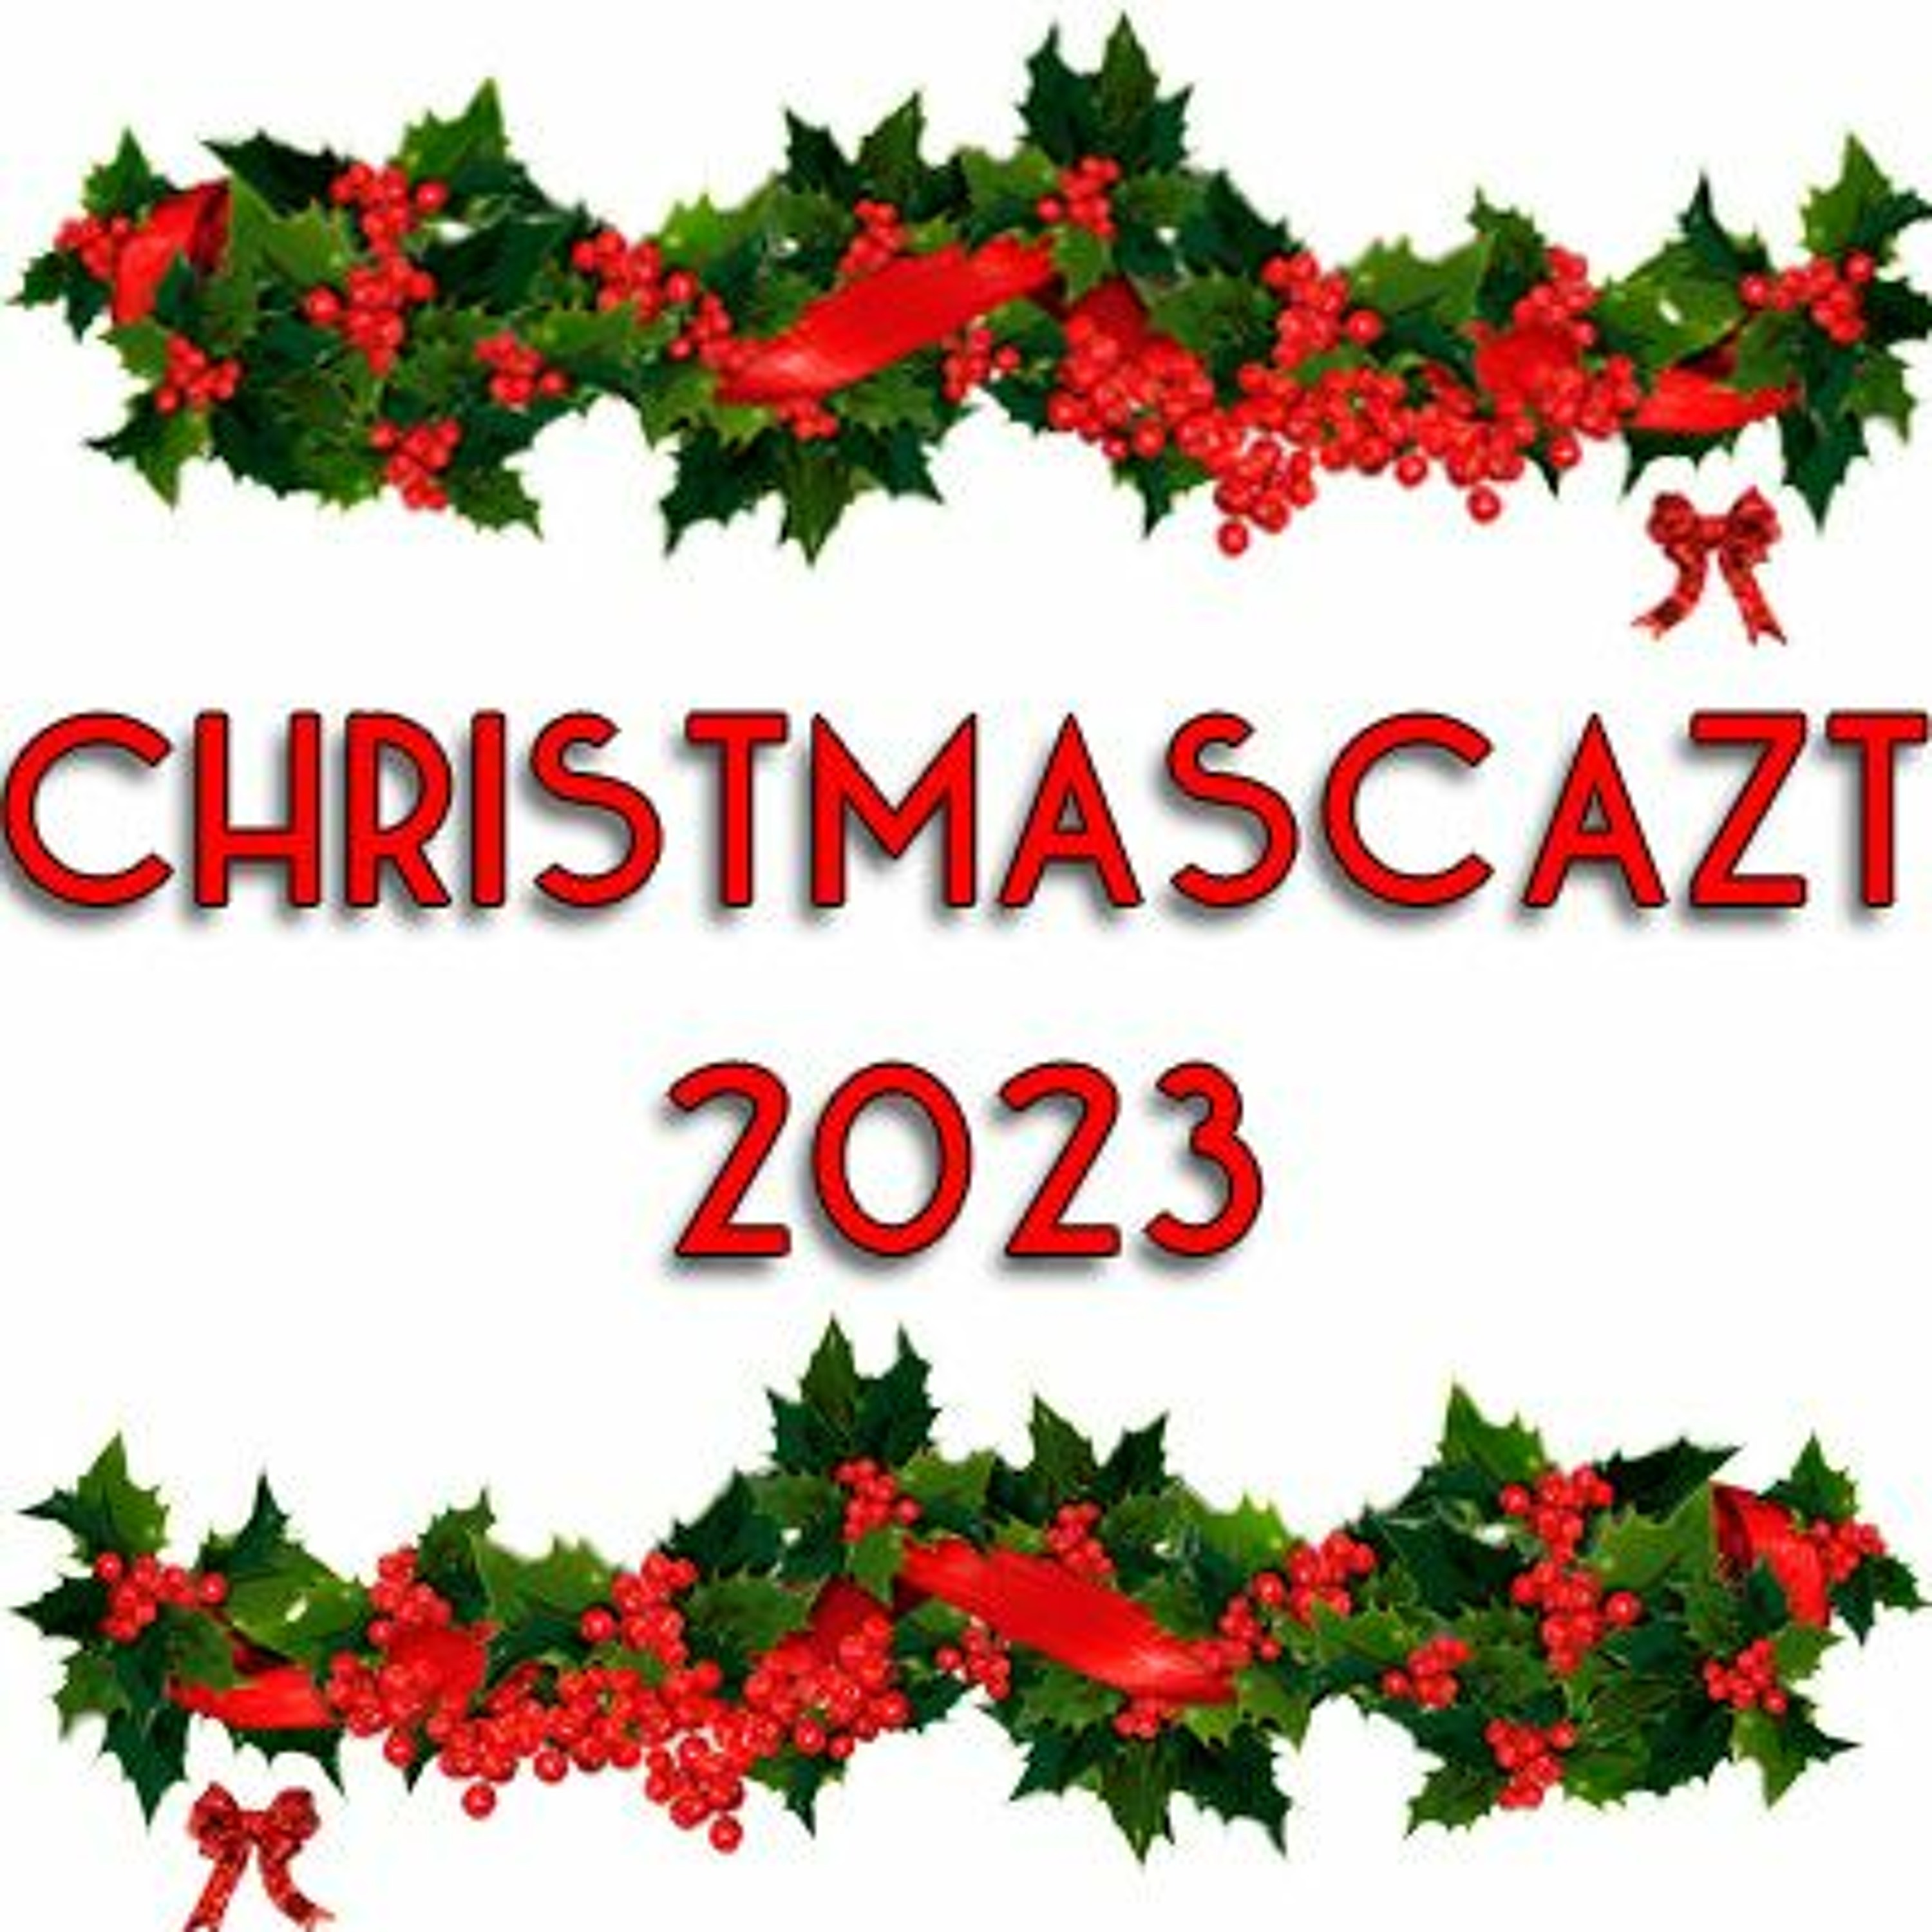 ADVENTCAzT 2023 – 24 – St. Stephen: His face was like that of an angel